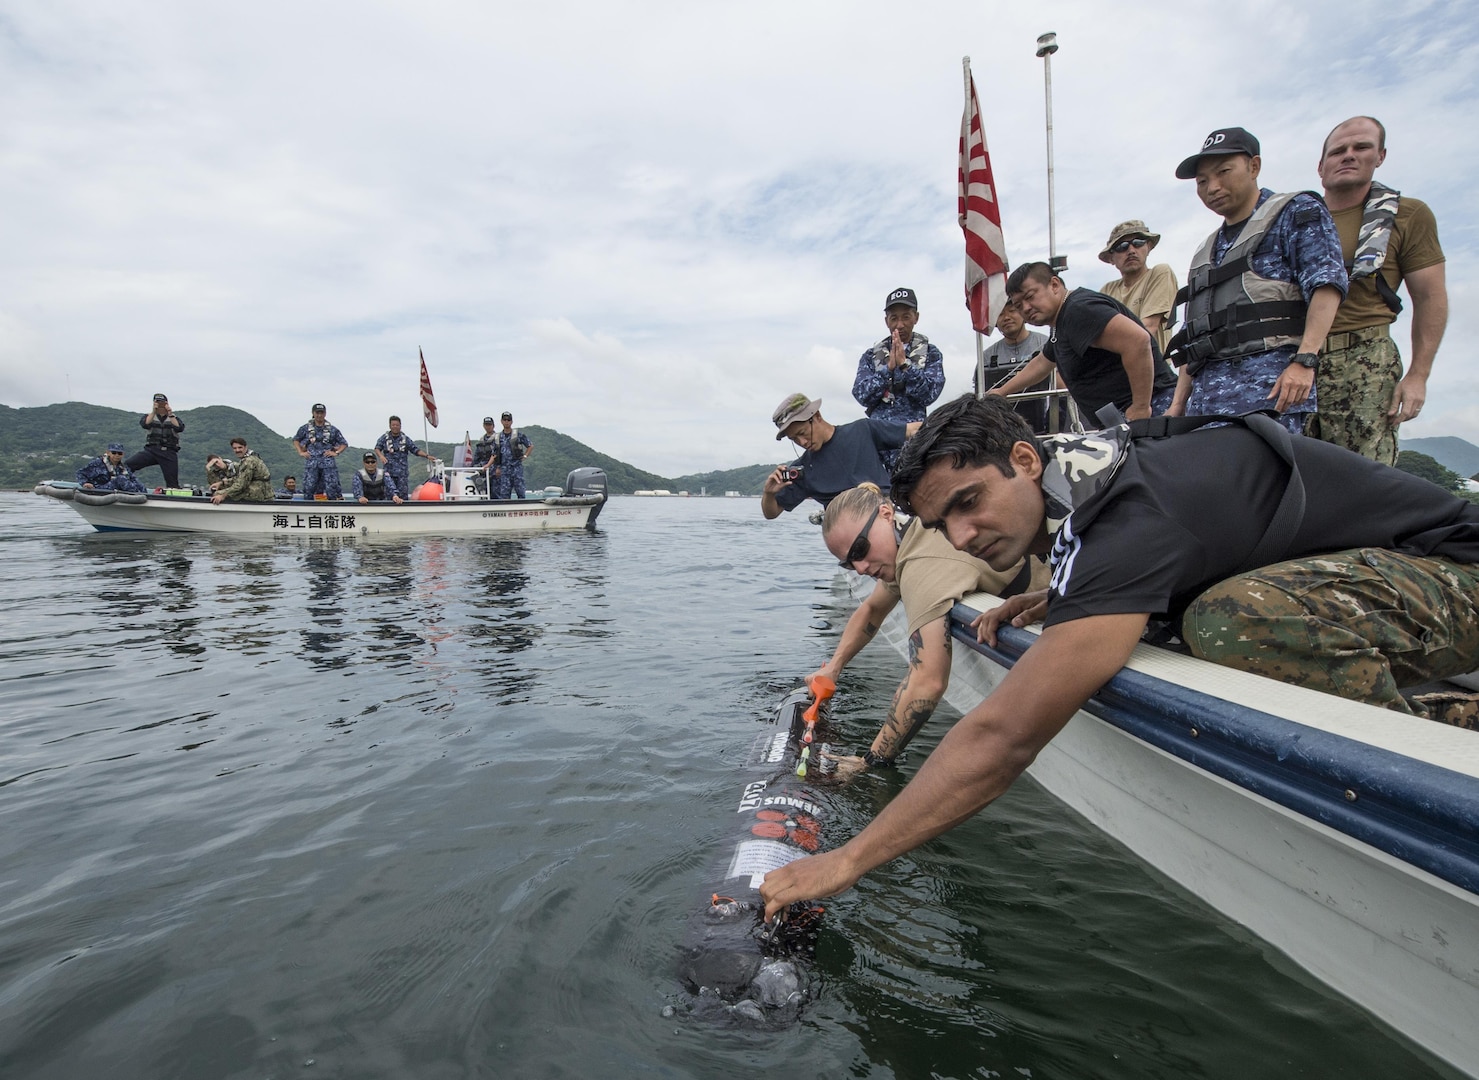 SASEBO, Japan (June 13, 2016) – An Indian Navy Explosive Ordnance Disposal (EOD) technician and a U.S. Navy Sailor launch a MK18 Mod. One unmanned underwater vehicle during a mine countermeasures training mission near Sasebo during Exercise Malabar 2016, June 13. A trilateral maritime exercise, Malabar is designed to enhance dynamic cooperation between the Indian Navy, Japanese Maritime Self-Defense Force (JMSDF) and U.S. Navy forces in the Indo-Asia- Pacific.

(U.S. Navy photo by Mass Communication Specialist 1st Class Charles E. White/ Released)